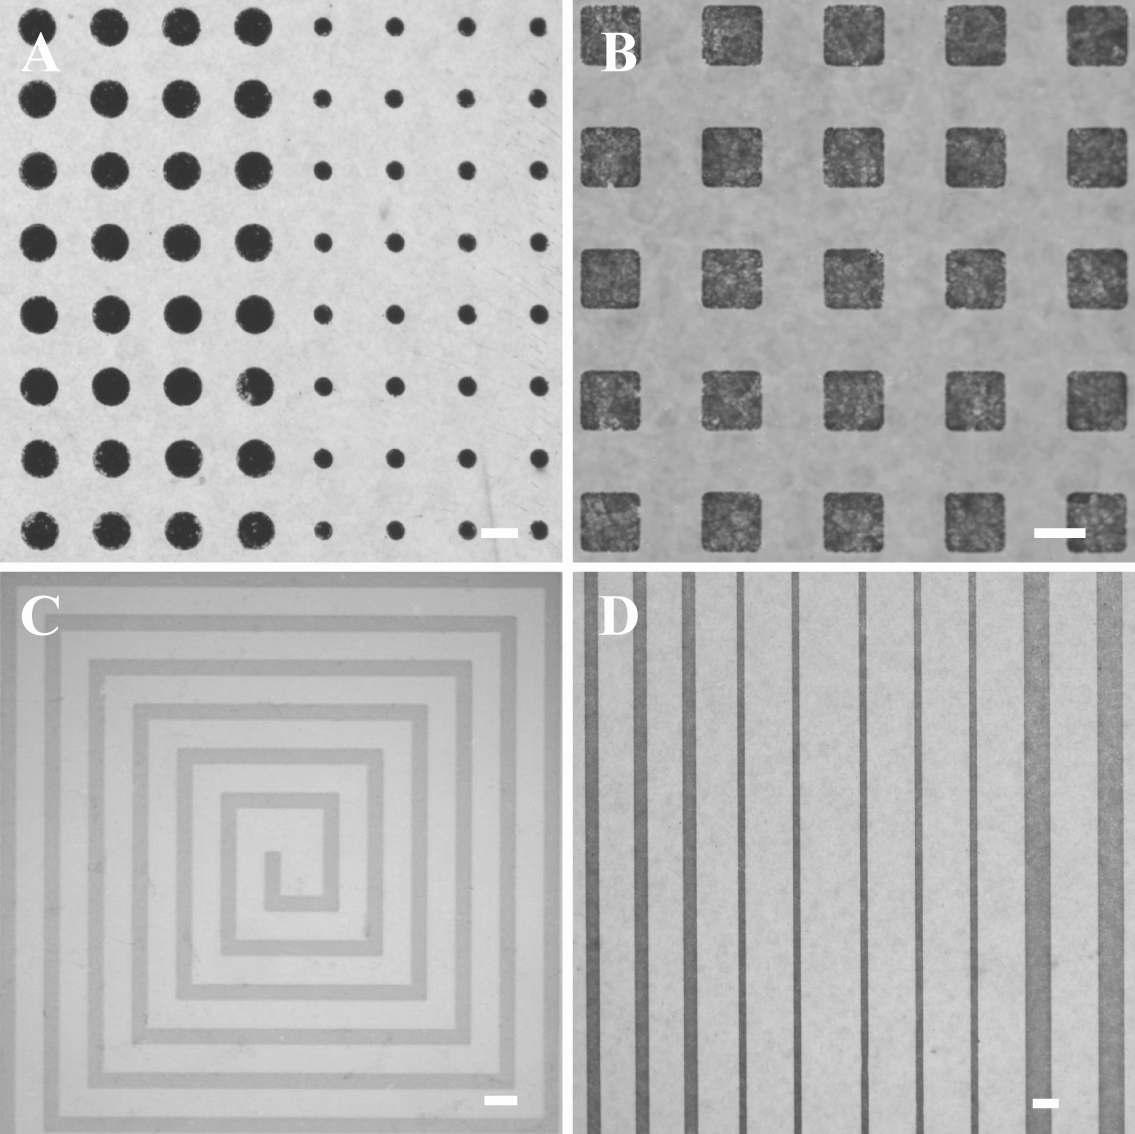 Optical microscope images of the SWCNT films patterned with gold nanoparticles. 10 mC was deposited onto SWCNT films, which were used as the working electrodes. Clean platinum wire and Ag/AgCl (saturated in 3M NaCl) were used as counter and reference electrodes, respectively. The scale bars are 100 μm.